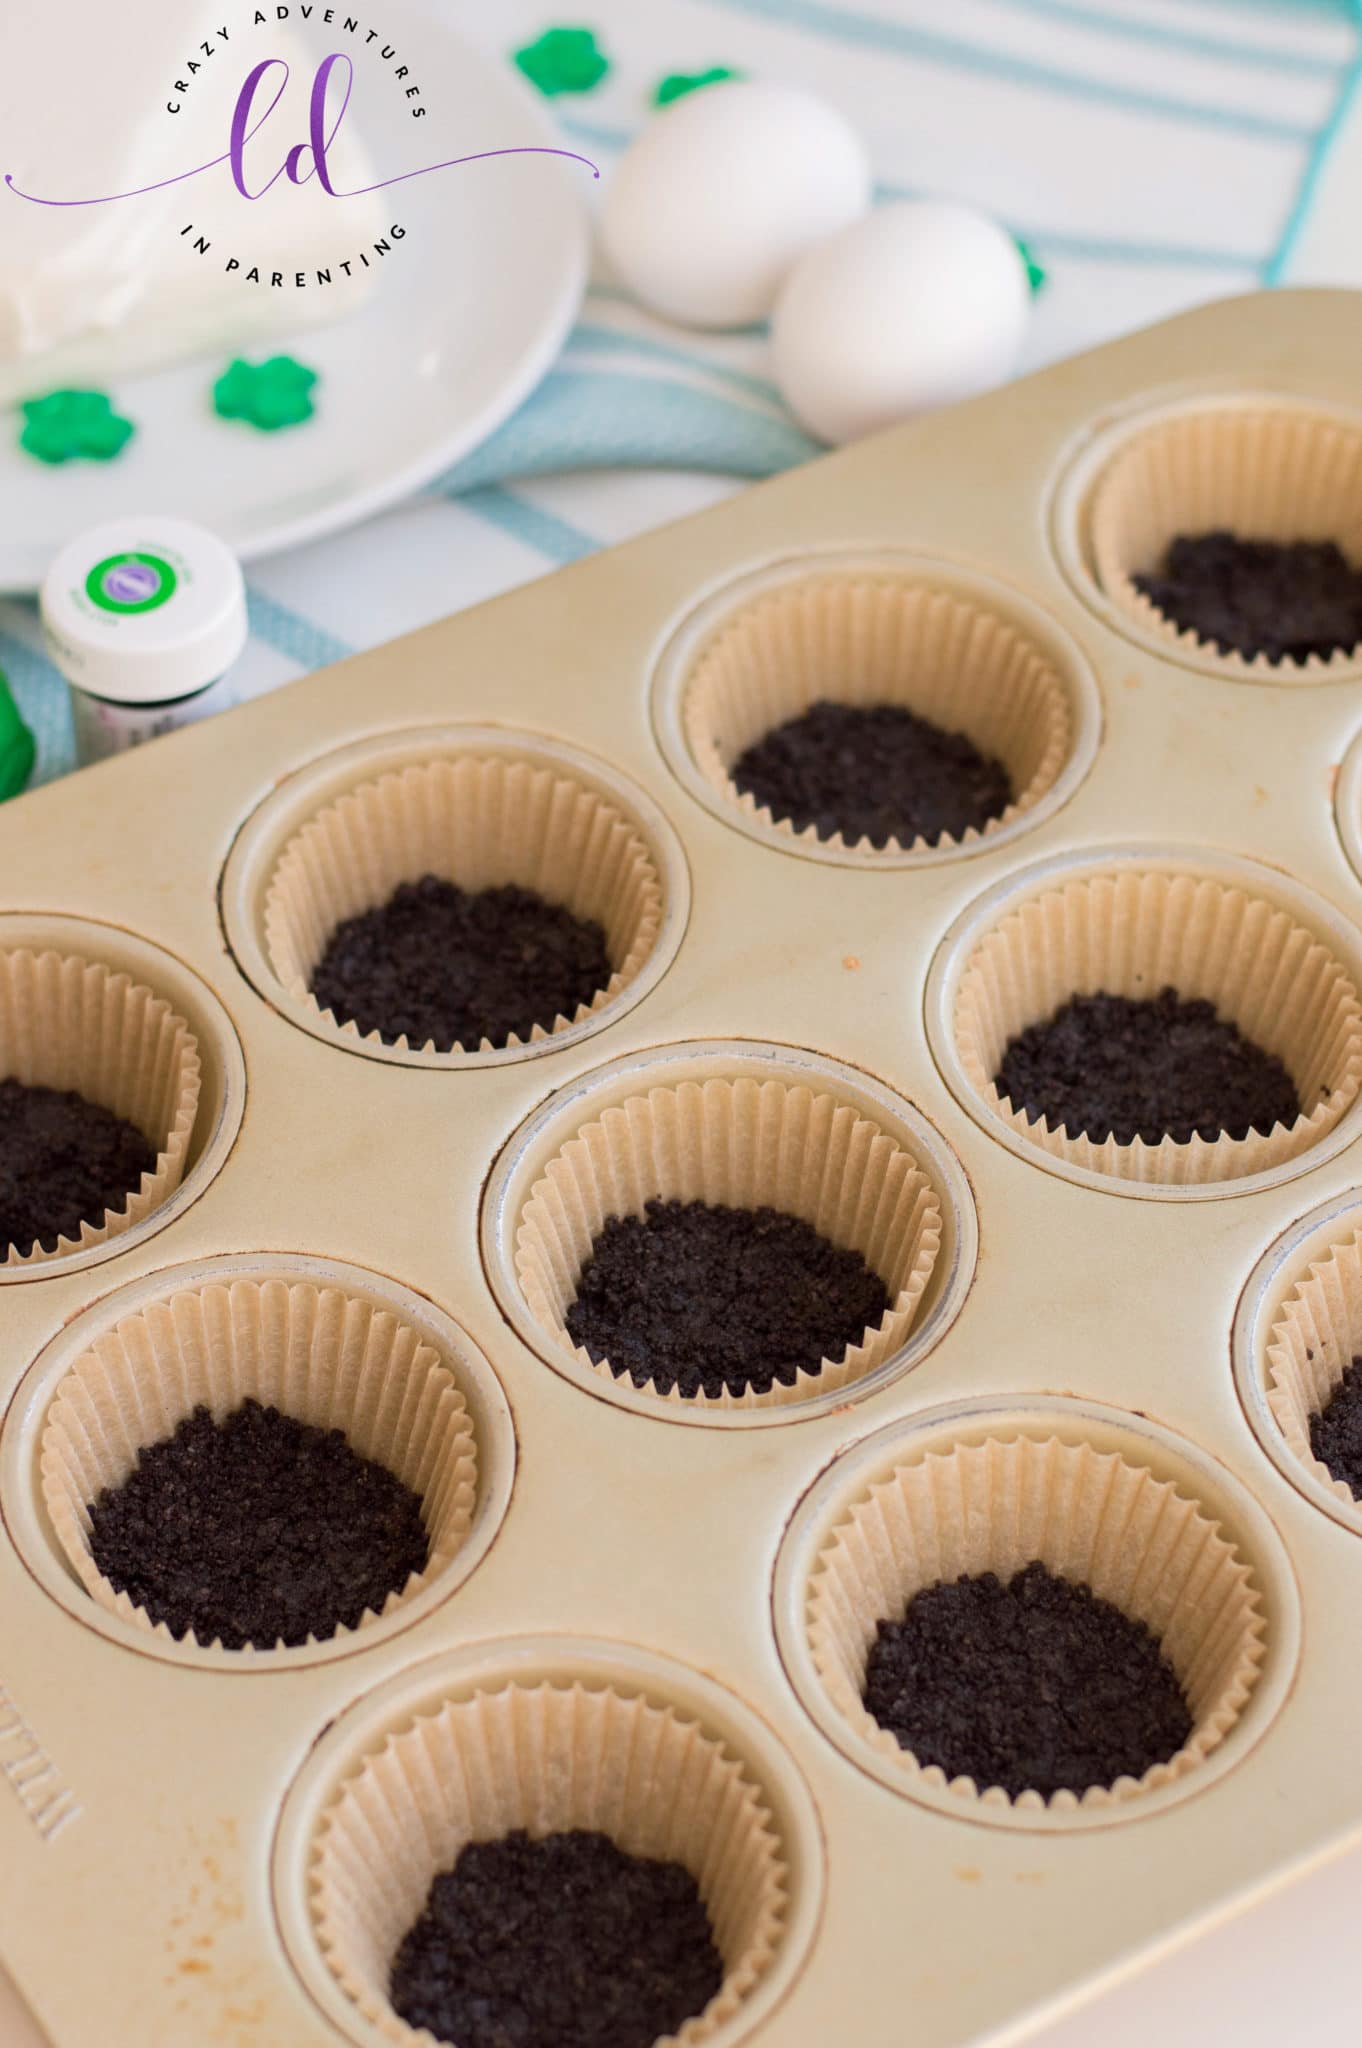 Oreo Cookie Base in Muffin Pans to Make St. Patrick's Day Mini Cheesecakes